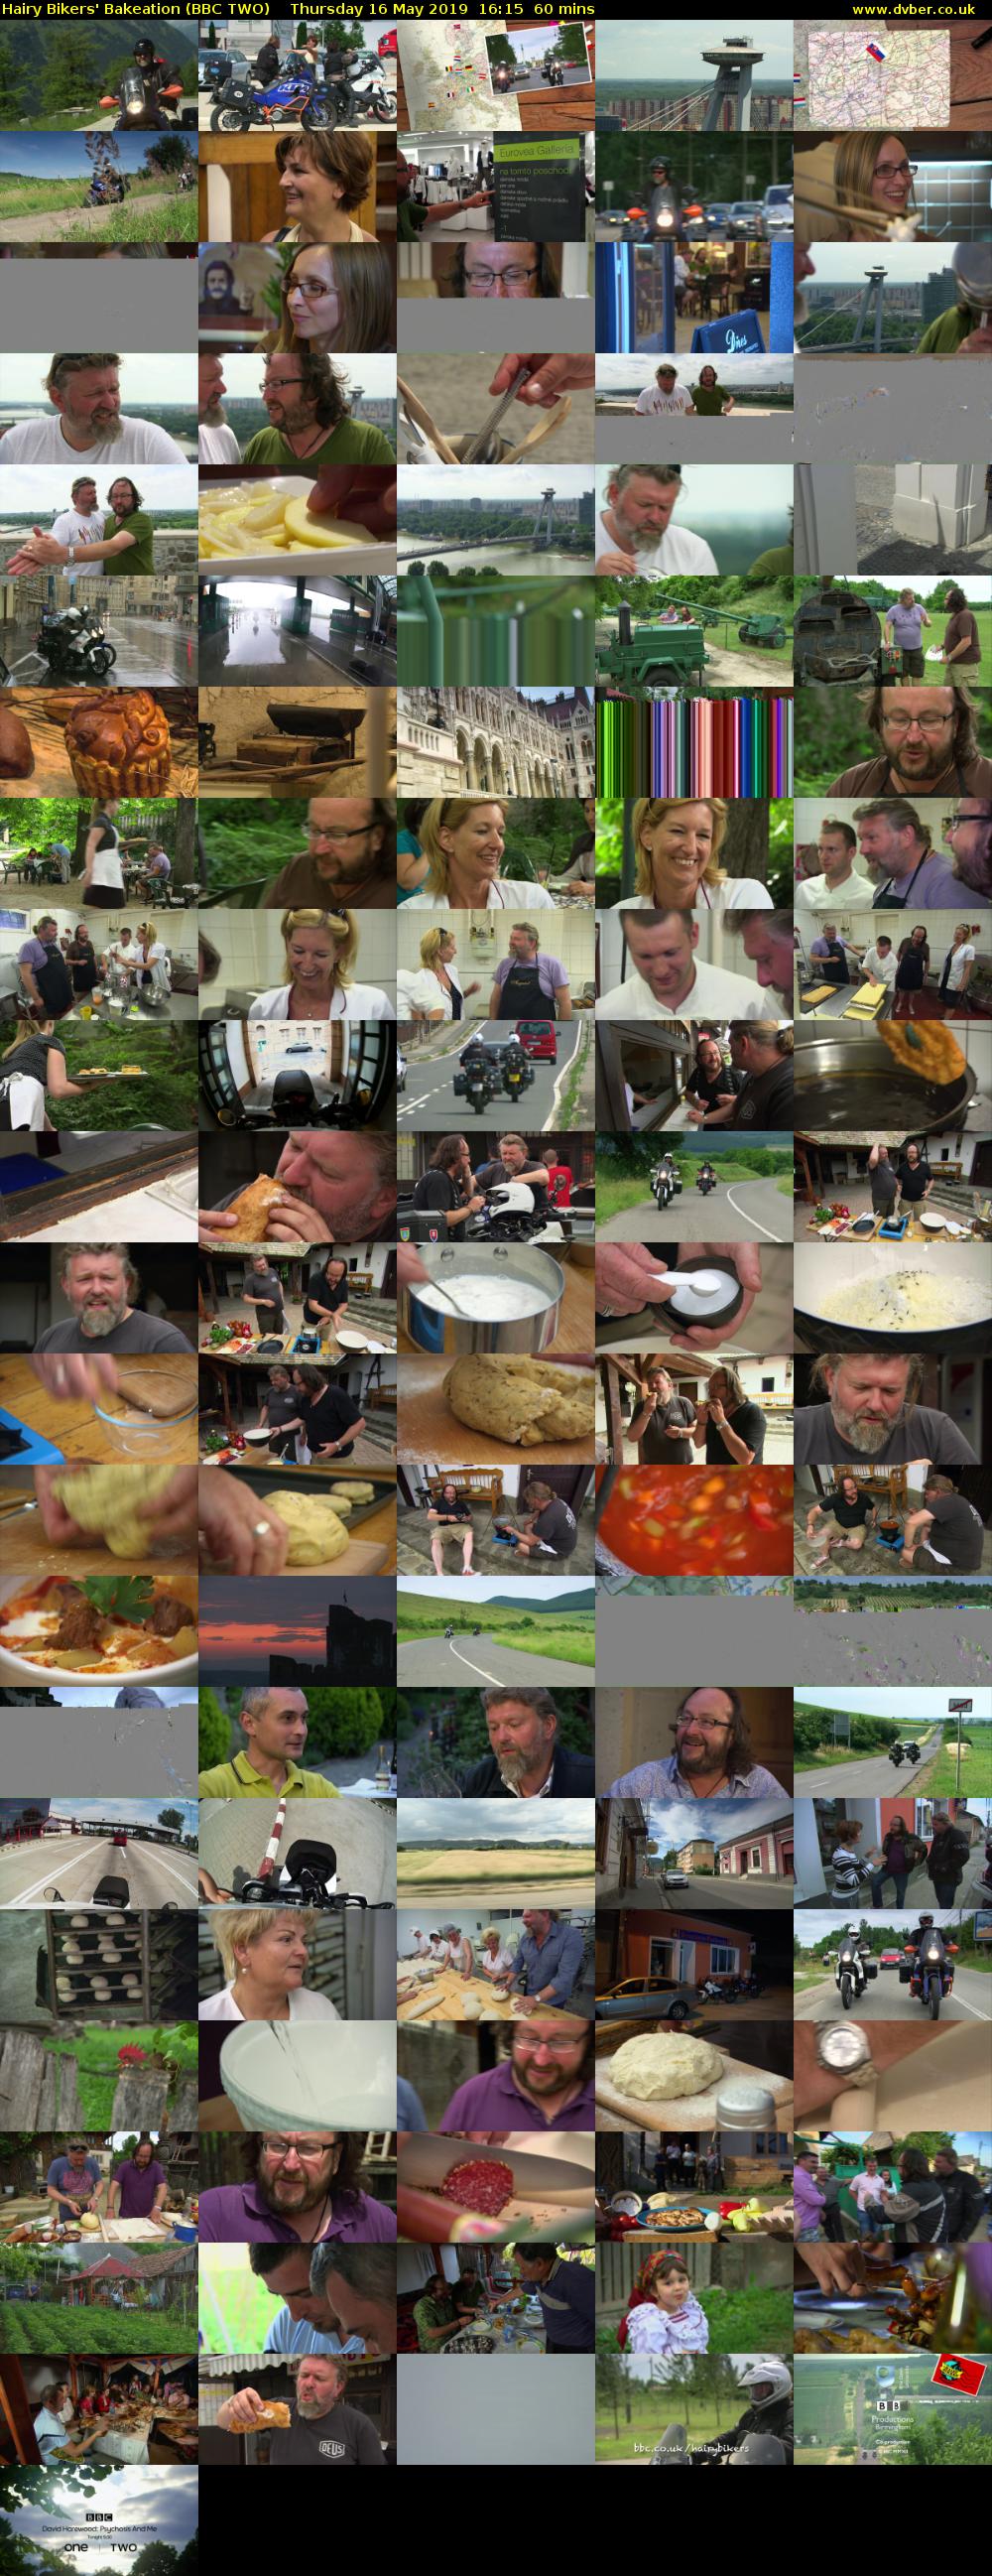 Hairy Bikers' Bakeation (BBC TWO) Thursday 16 May 2019 16:15 - 17:15